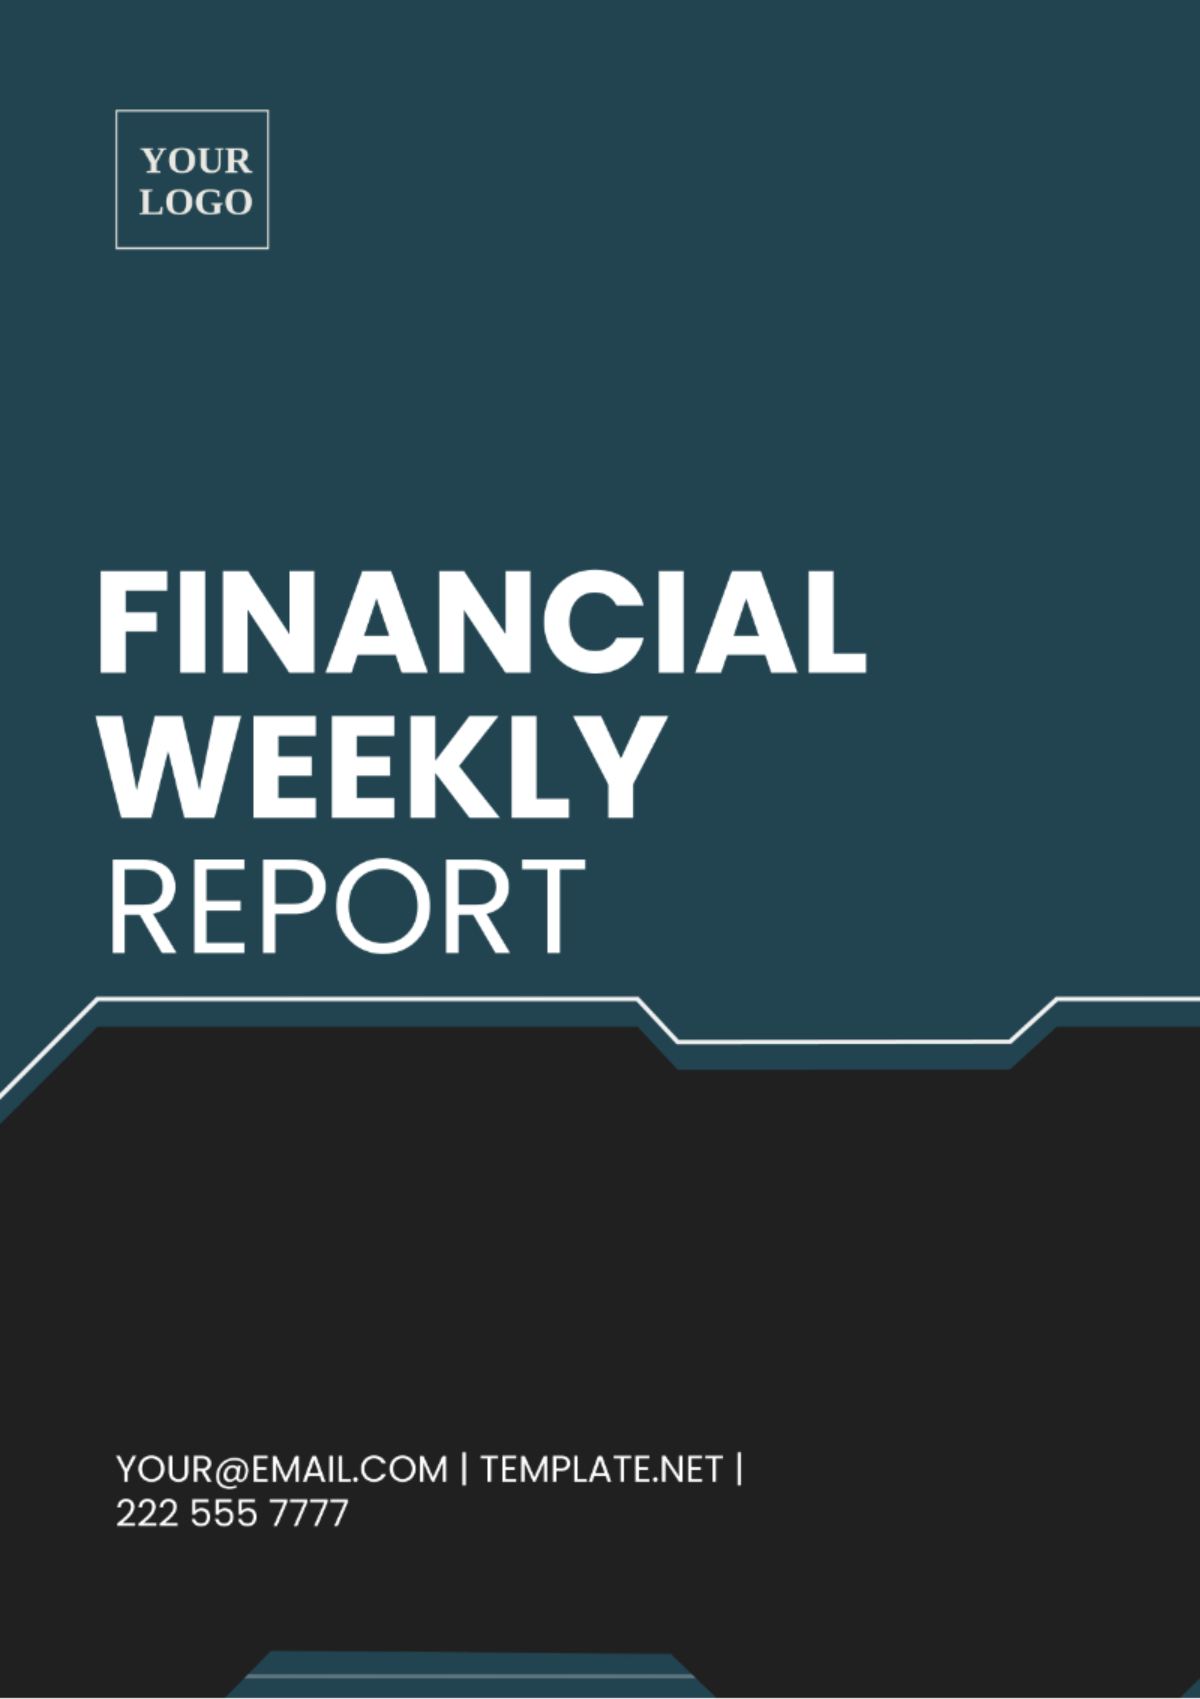 Financial Weekly Report Template